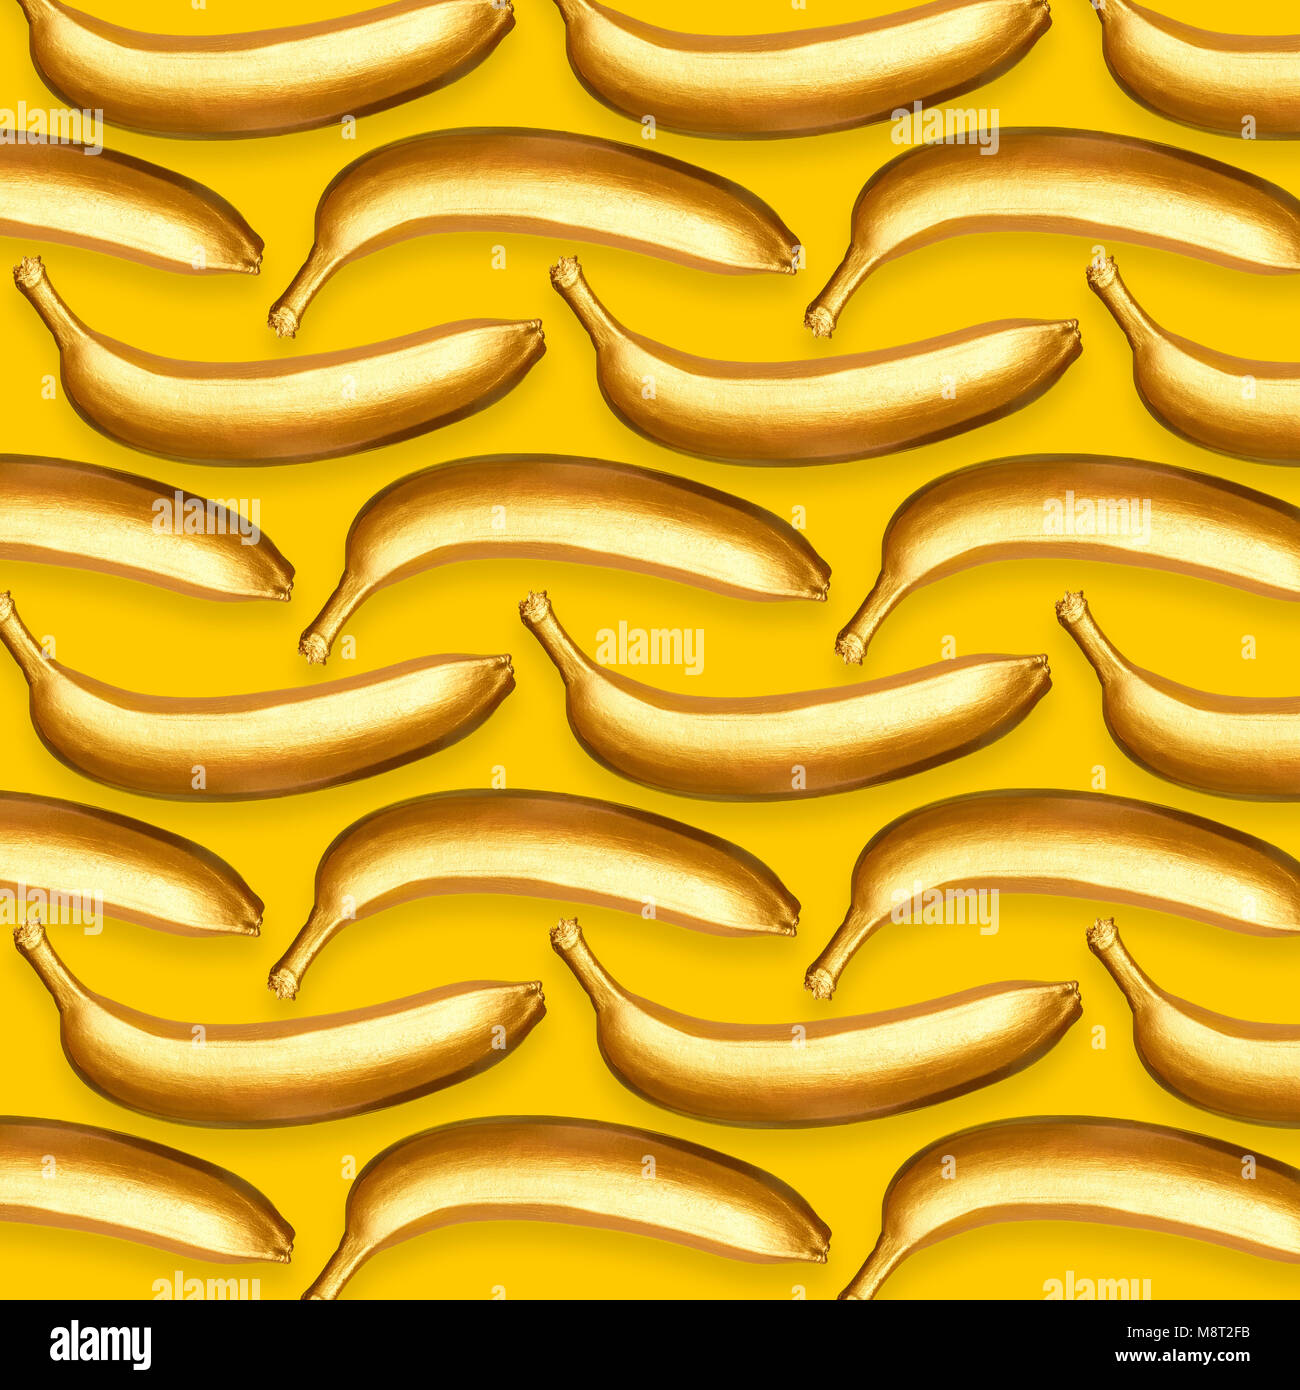 Pattern of golden bananas on a yellow background Stock Photo